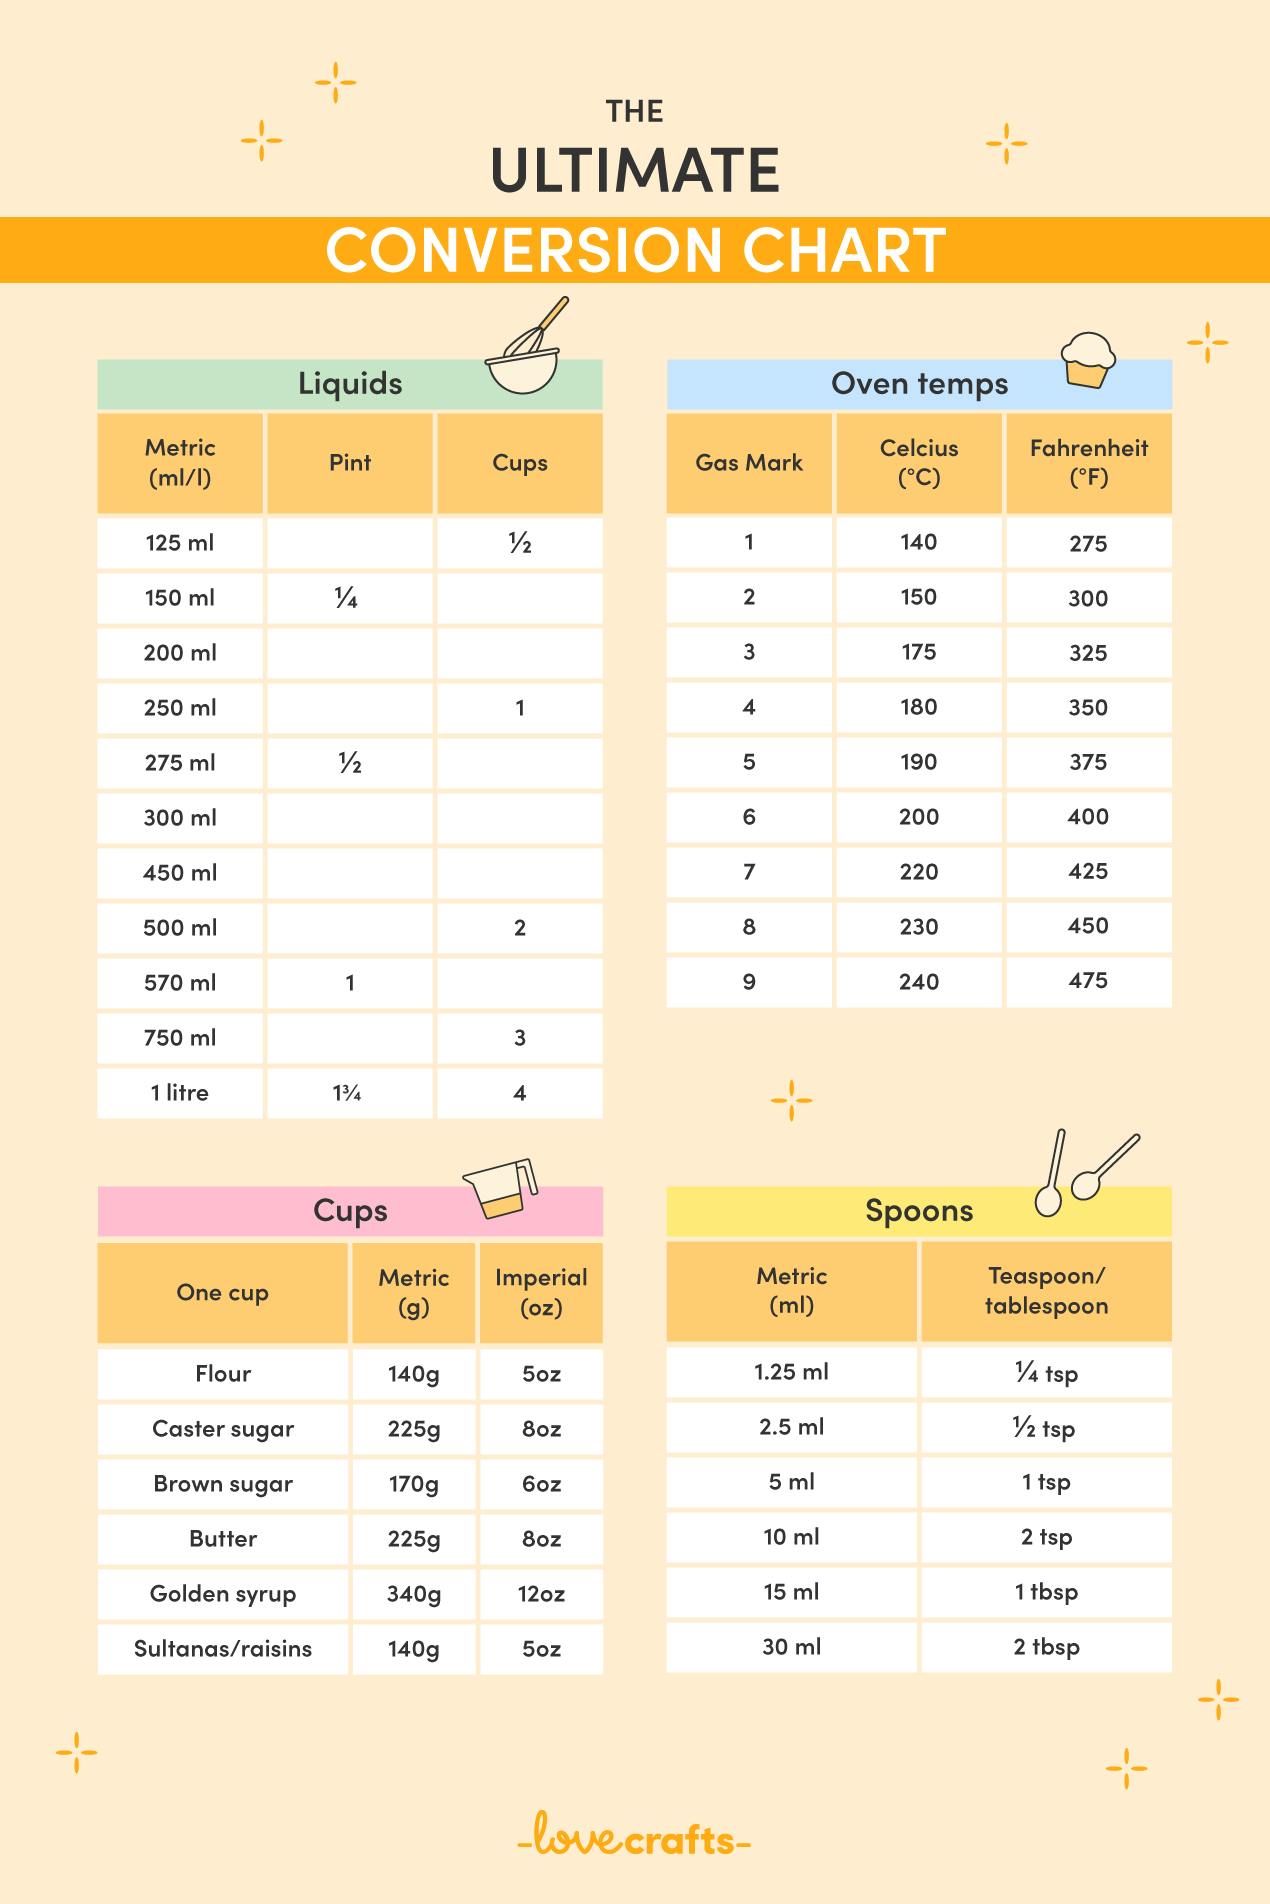 https://images.prismic.io/lovecrafts/551088f4-53a8-41b0-868a-19e57bc574c7_The-Ultimate-Baking-Conversion-Chart-1.1+%281%29.png?auto=compress,format